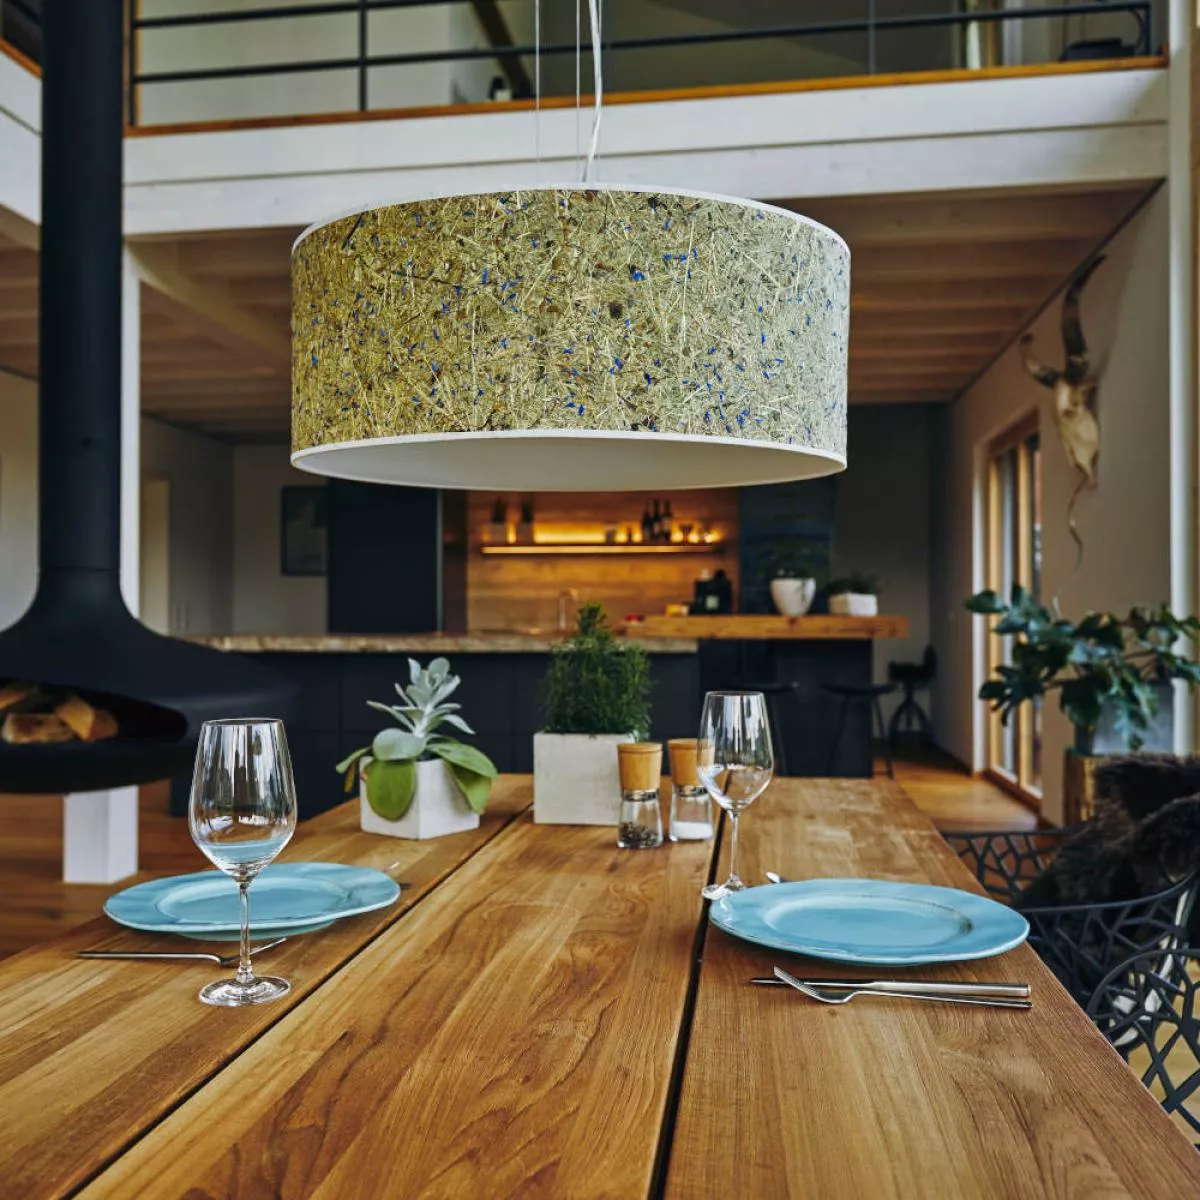 Design Pendant Lamp with Shade made of Alpine Hay and Corn Flower Petals Ø 55 cm